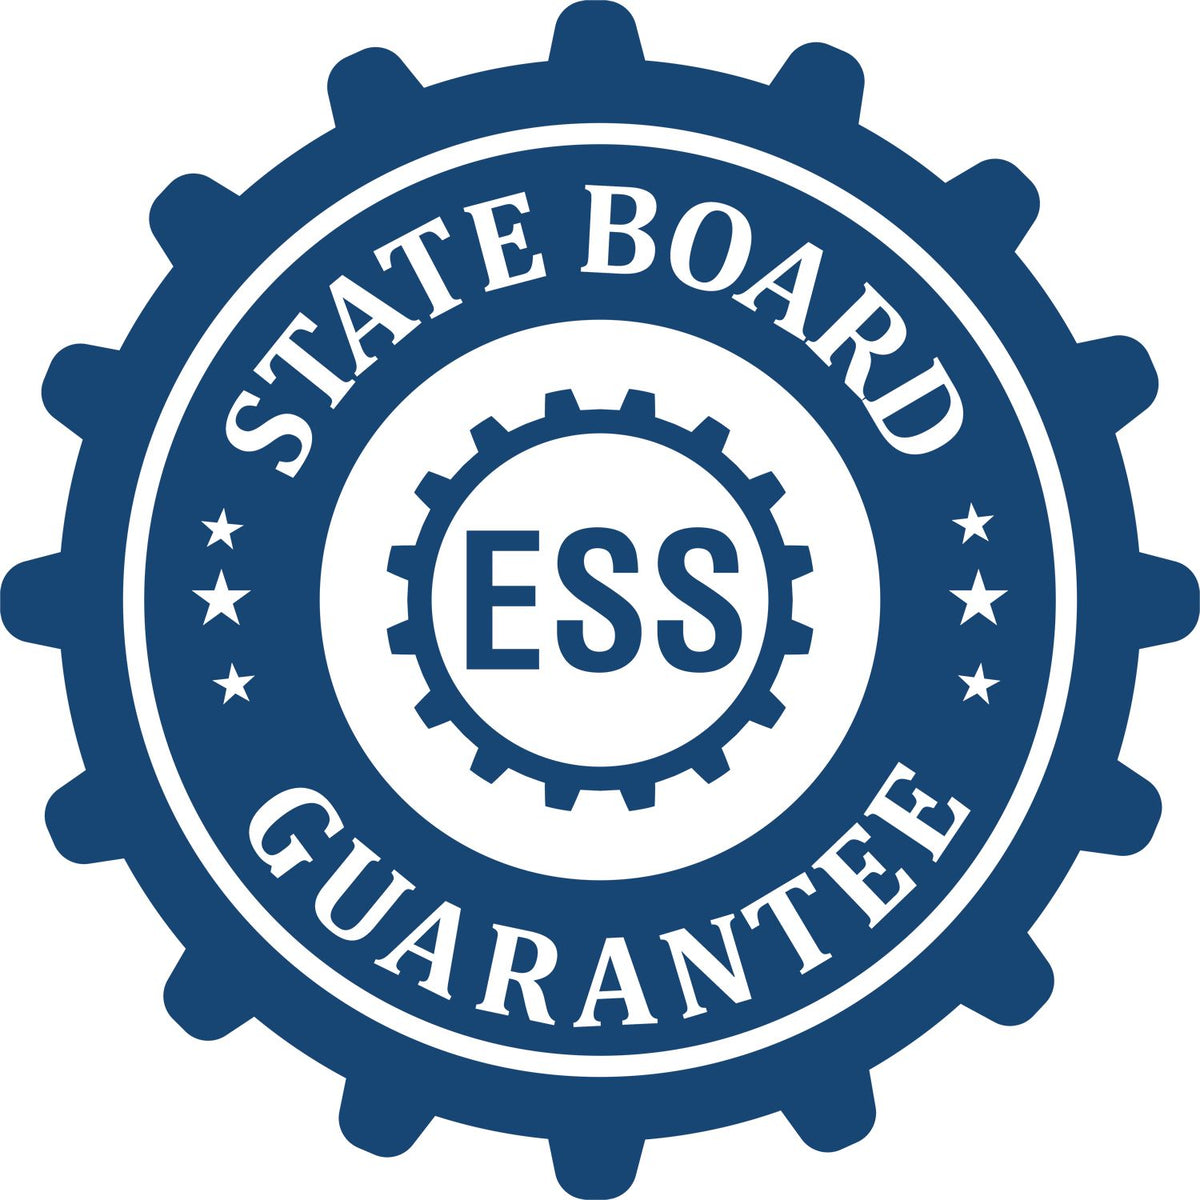 An emblem in a gear shape illustrating a state board guarantee for the Digital Alaska Landscape Architect Stamp product.